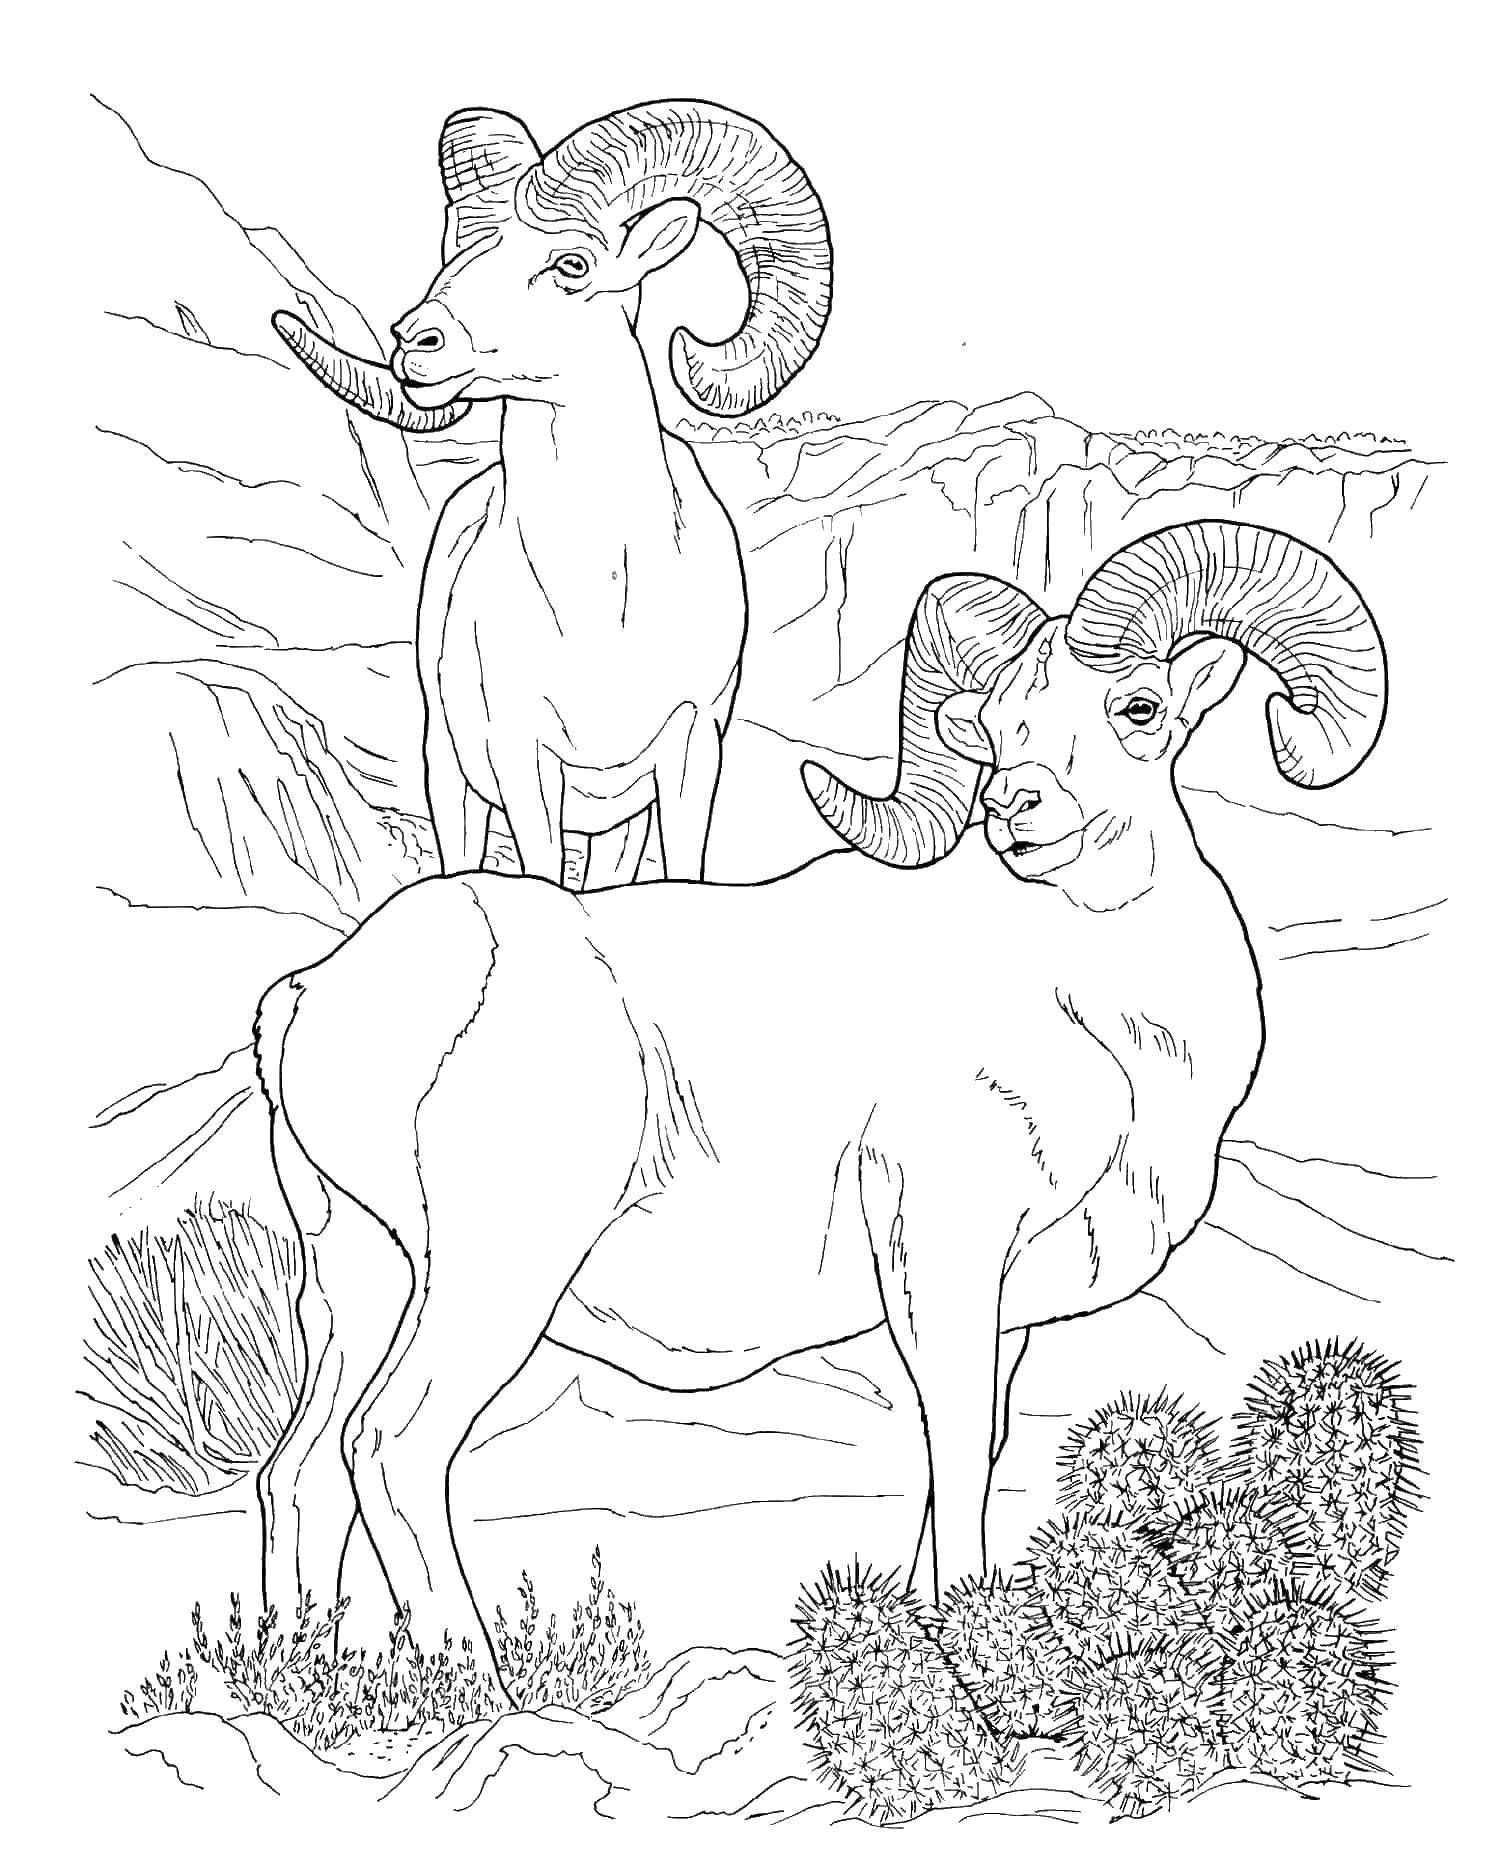 Coloring Two mountain sheep. Category Wild animals. Tags:  sheep, cactus, horns.